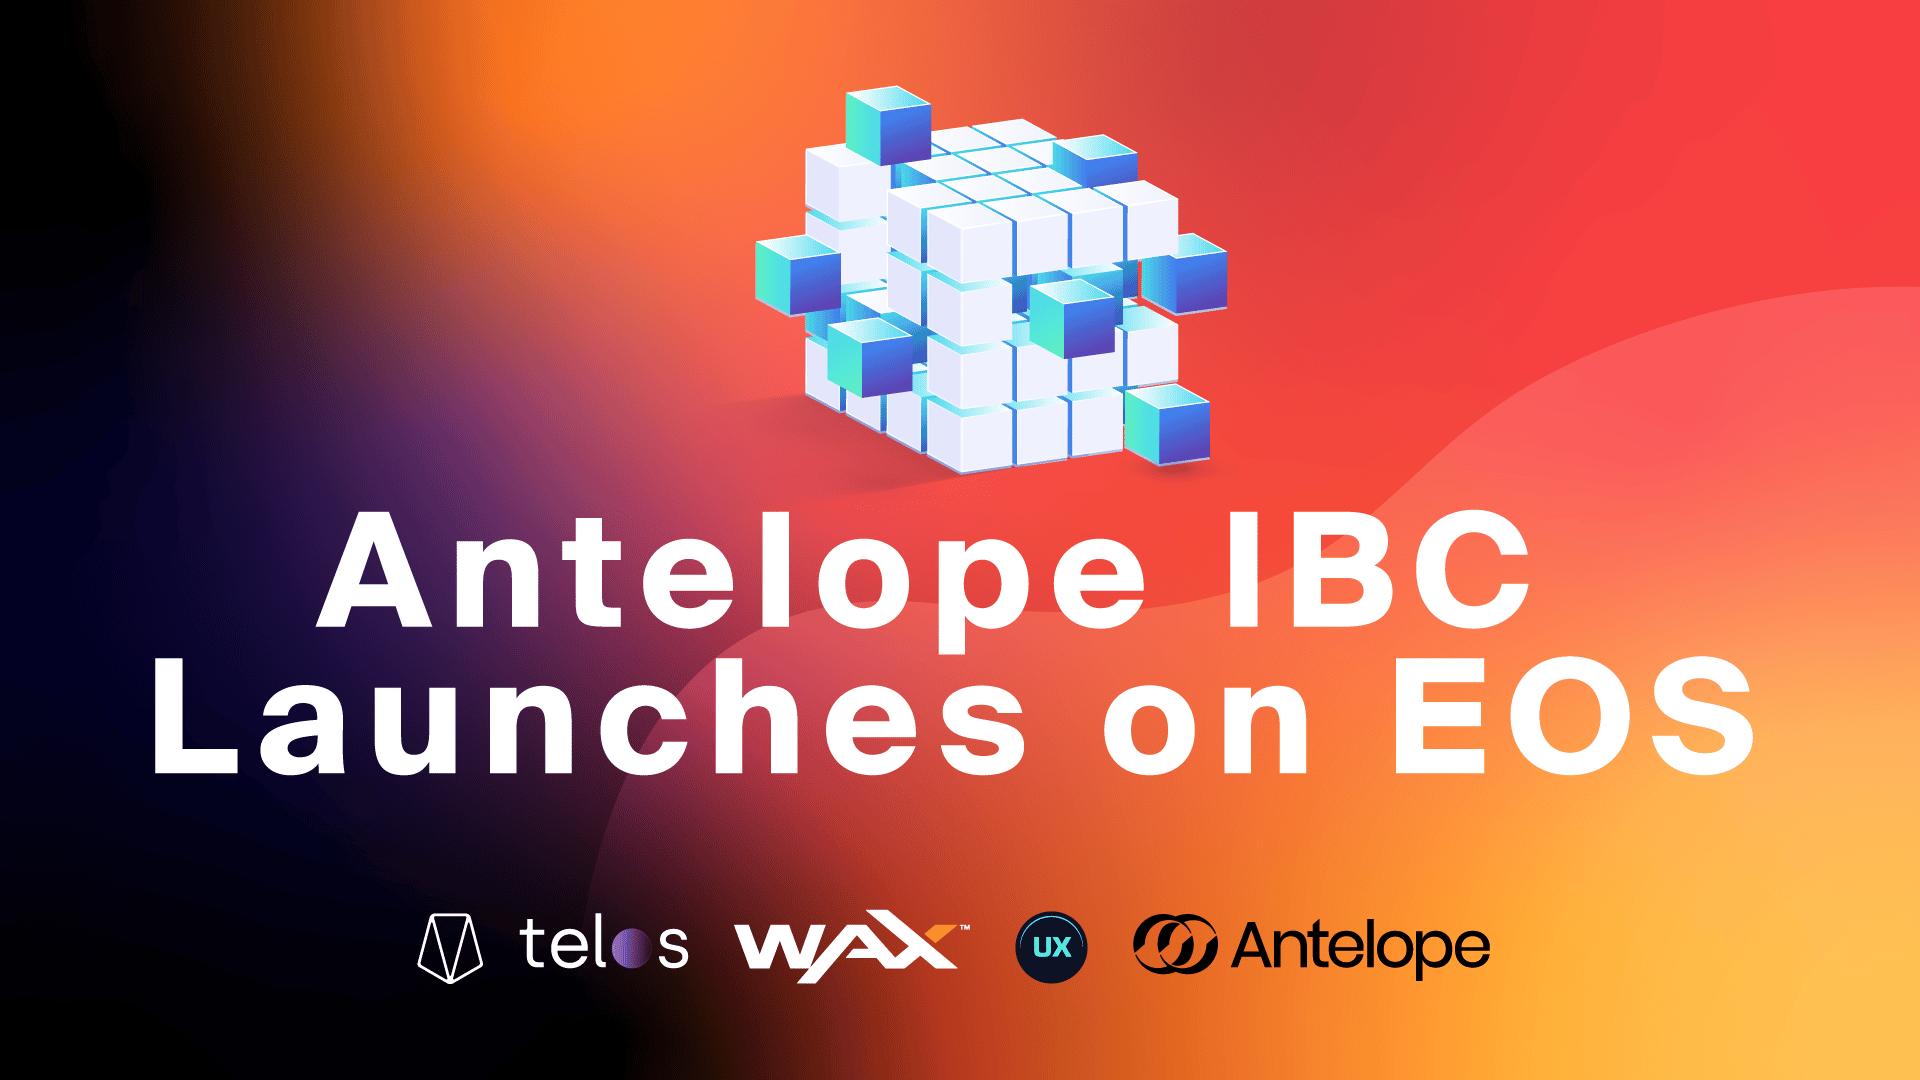 Antelope-IBC-Launches-on-EOS.png.jpg